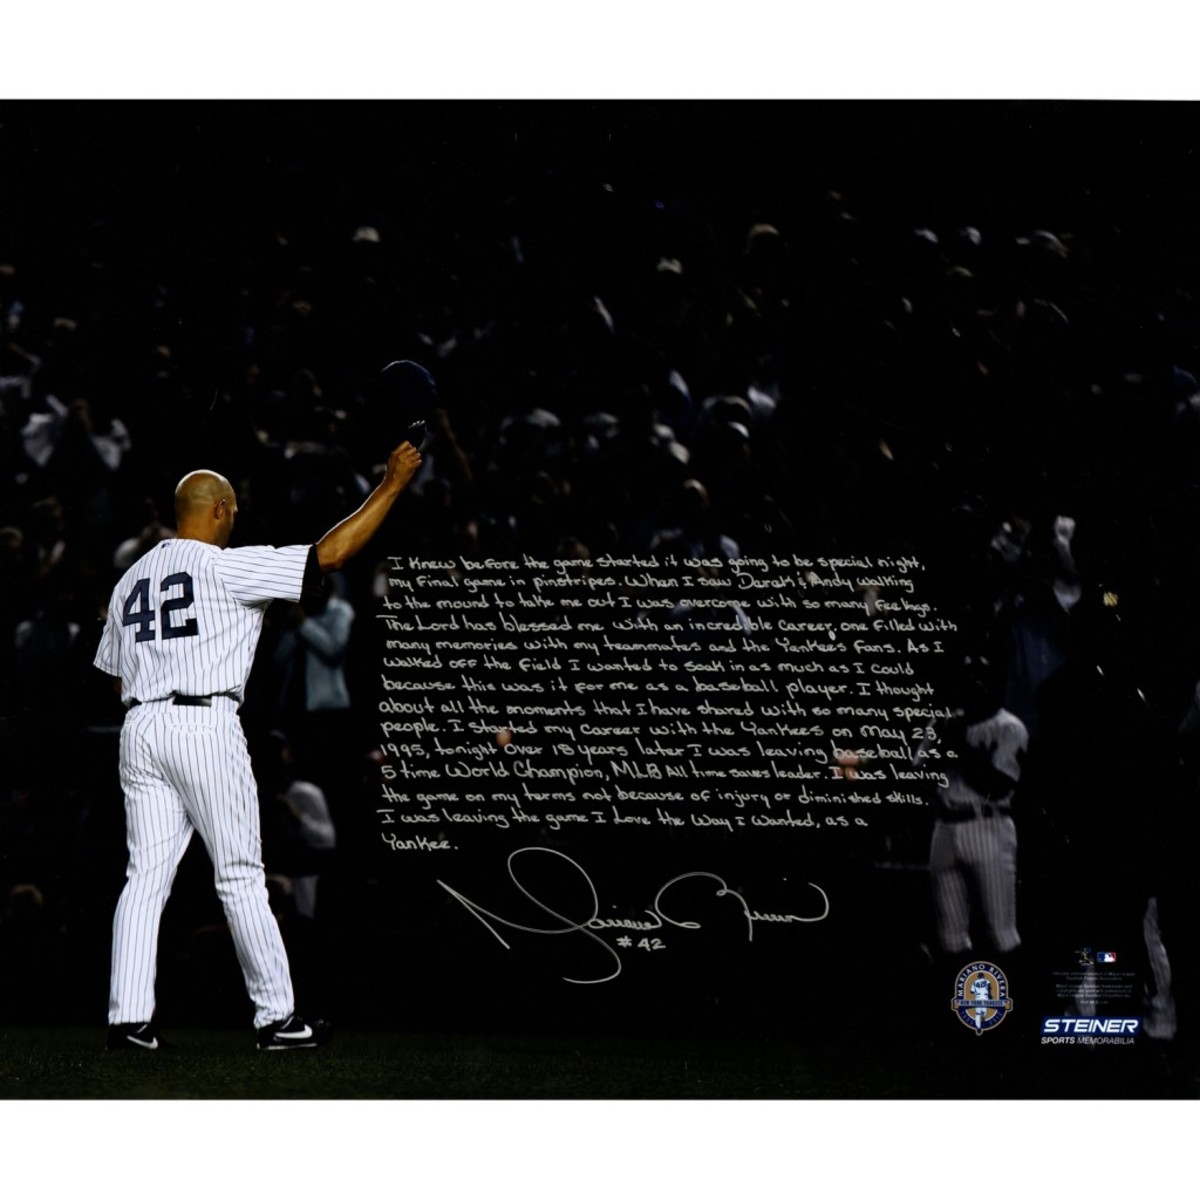 Steiner Sports introduces a new line of memorabilia, "In My Own Words," featuring lasting moments in sports told by the athletes who performed the feats. 